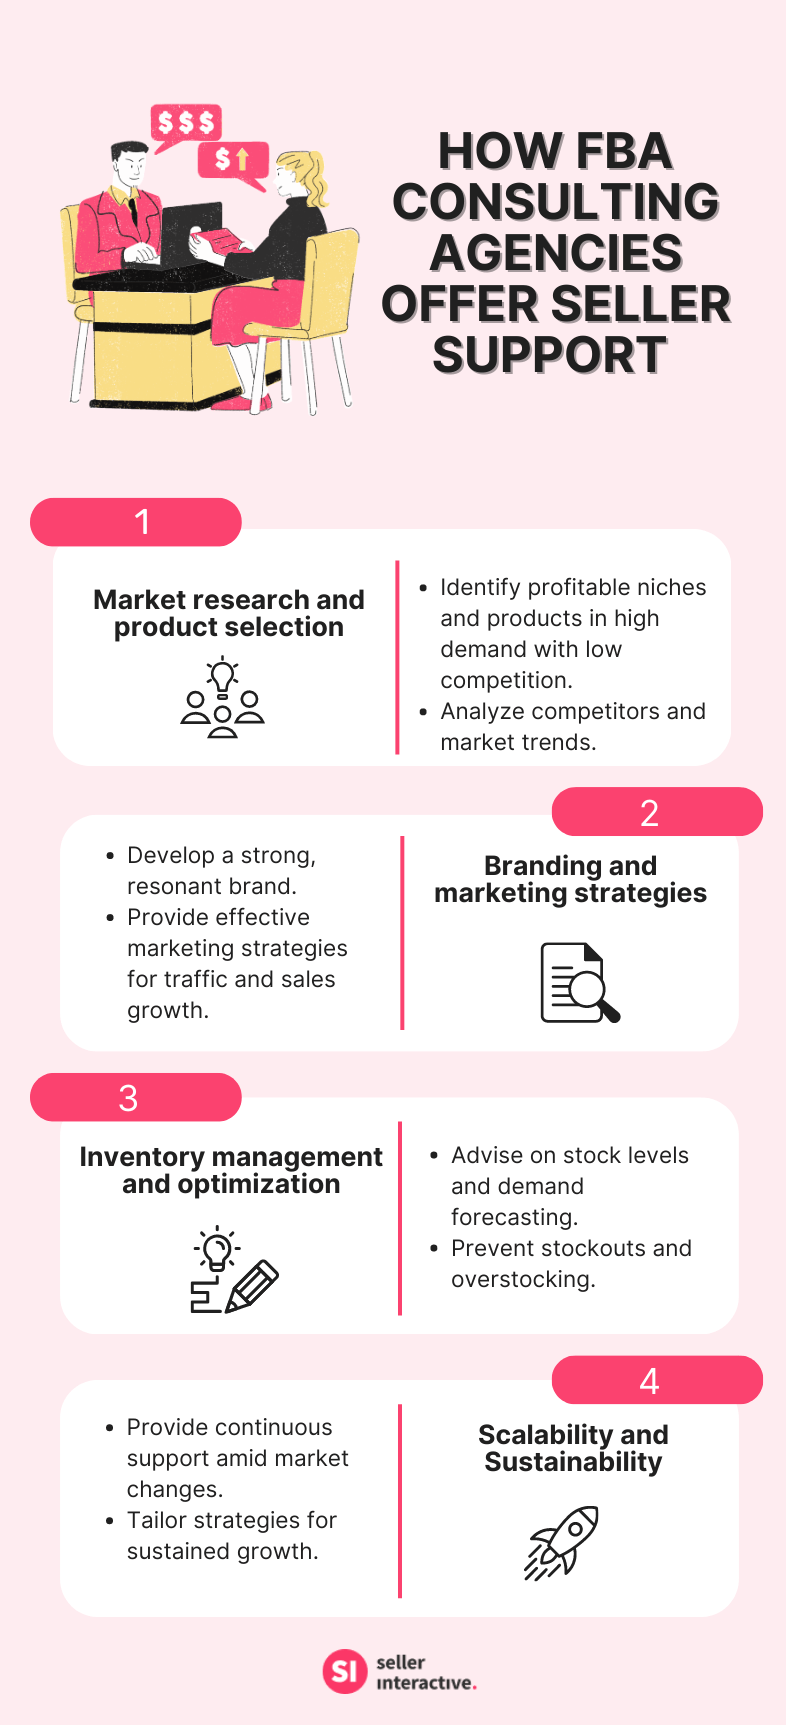 an infographic about how amazon consulting agencies help FBA sellers